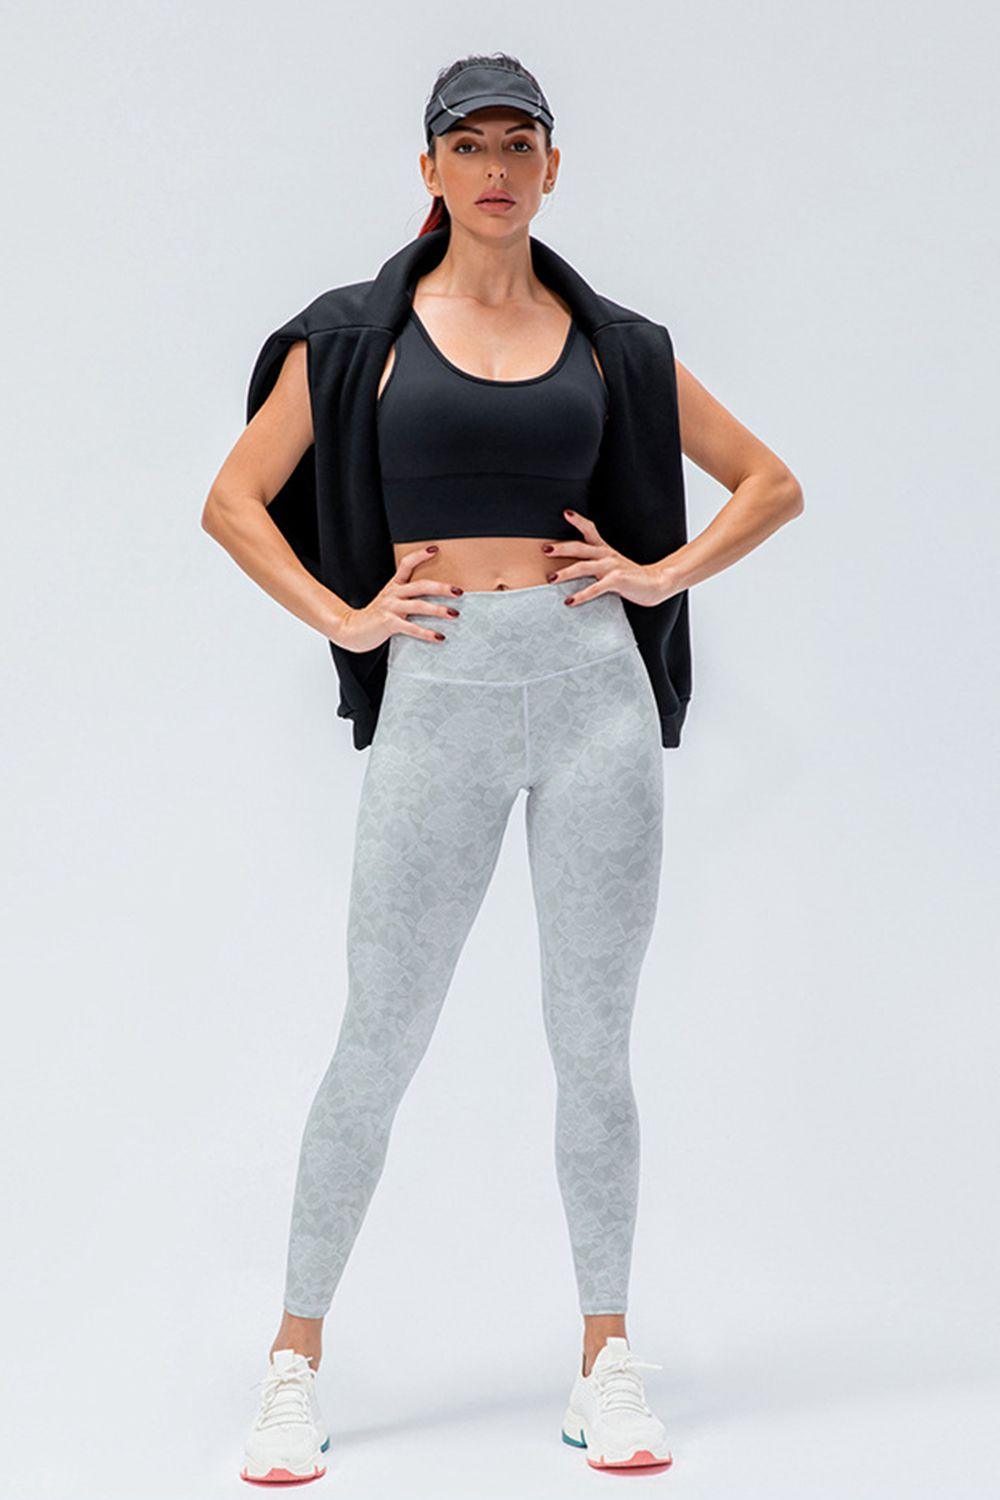 Wide Waistband Slim Fit Active Leggings - Lab Fashion, Home & Health